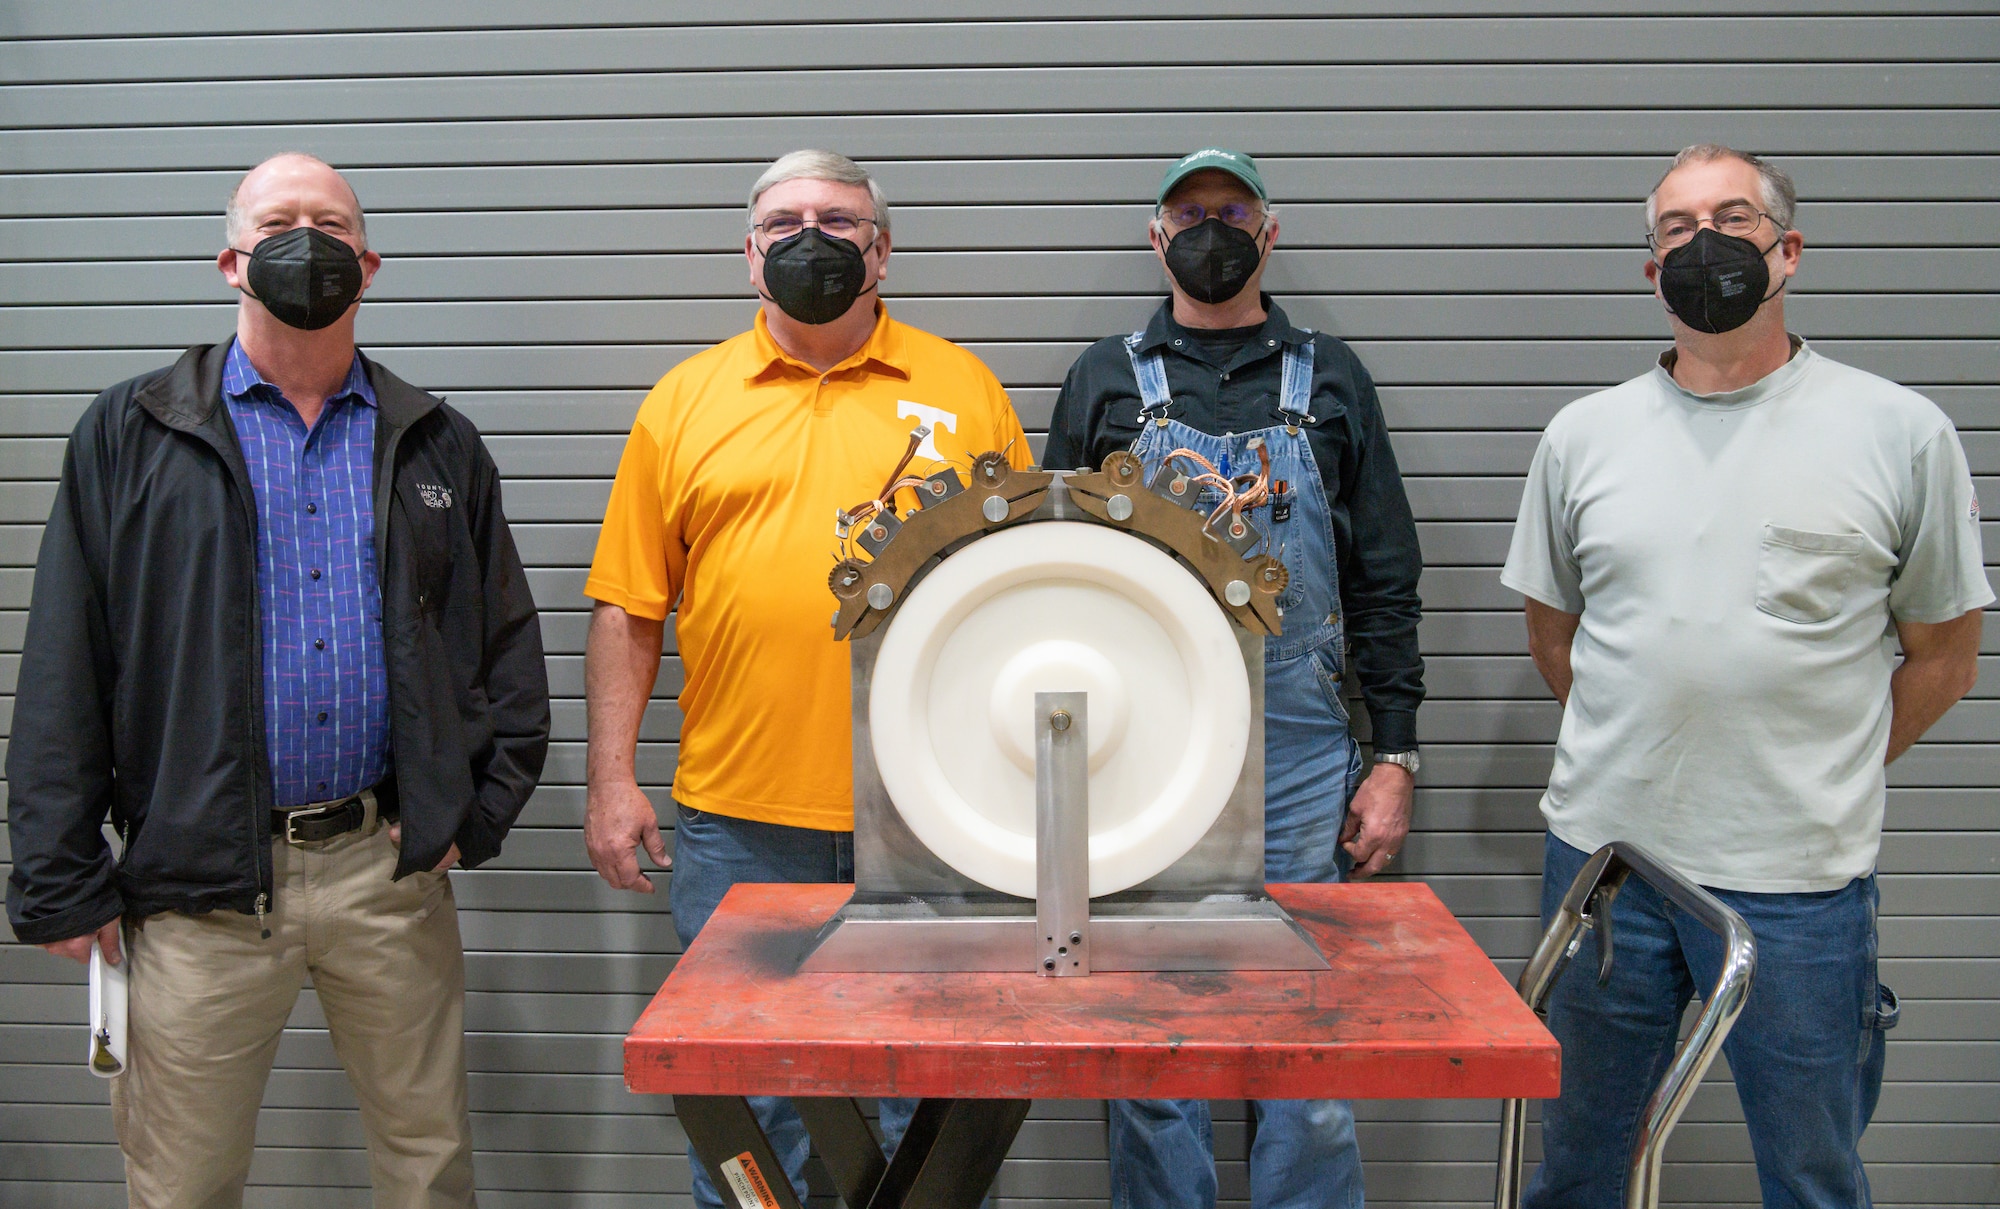 AEDC team members stand behind the device they designed and built to surface motor brushes.